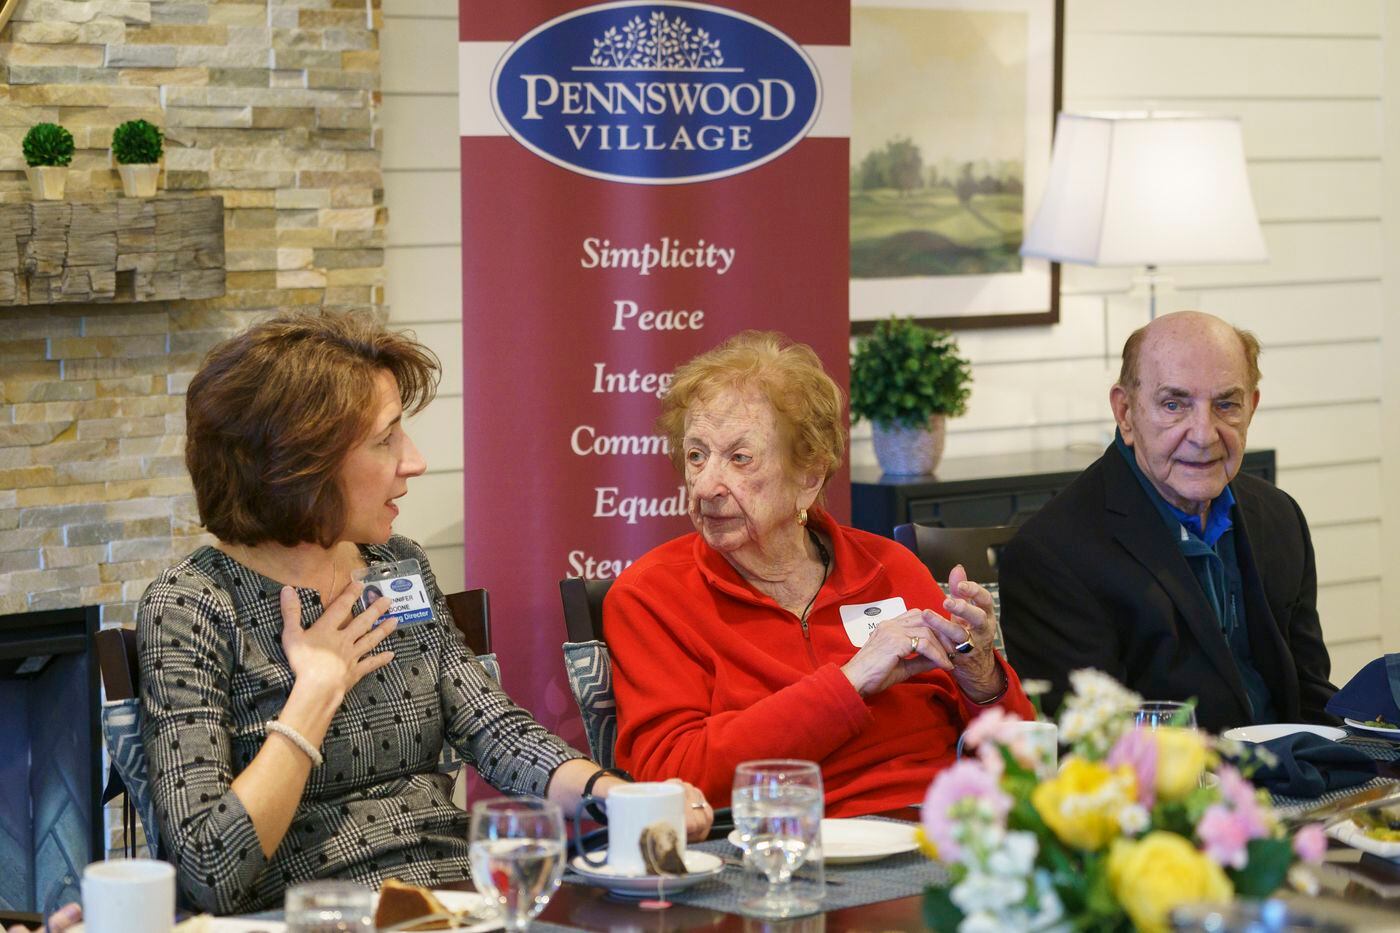 Jennifer Doone (left), marketing director, talks with potential resident, Mary O'Neil, at Pennswood Village in Newtown, as another visitor, William Berger, listens. 